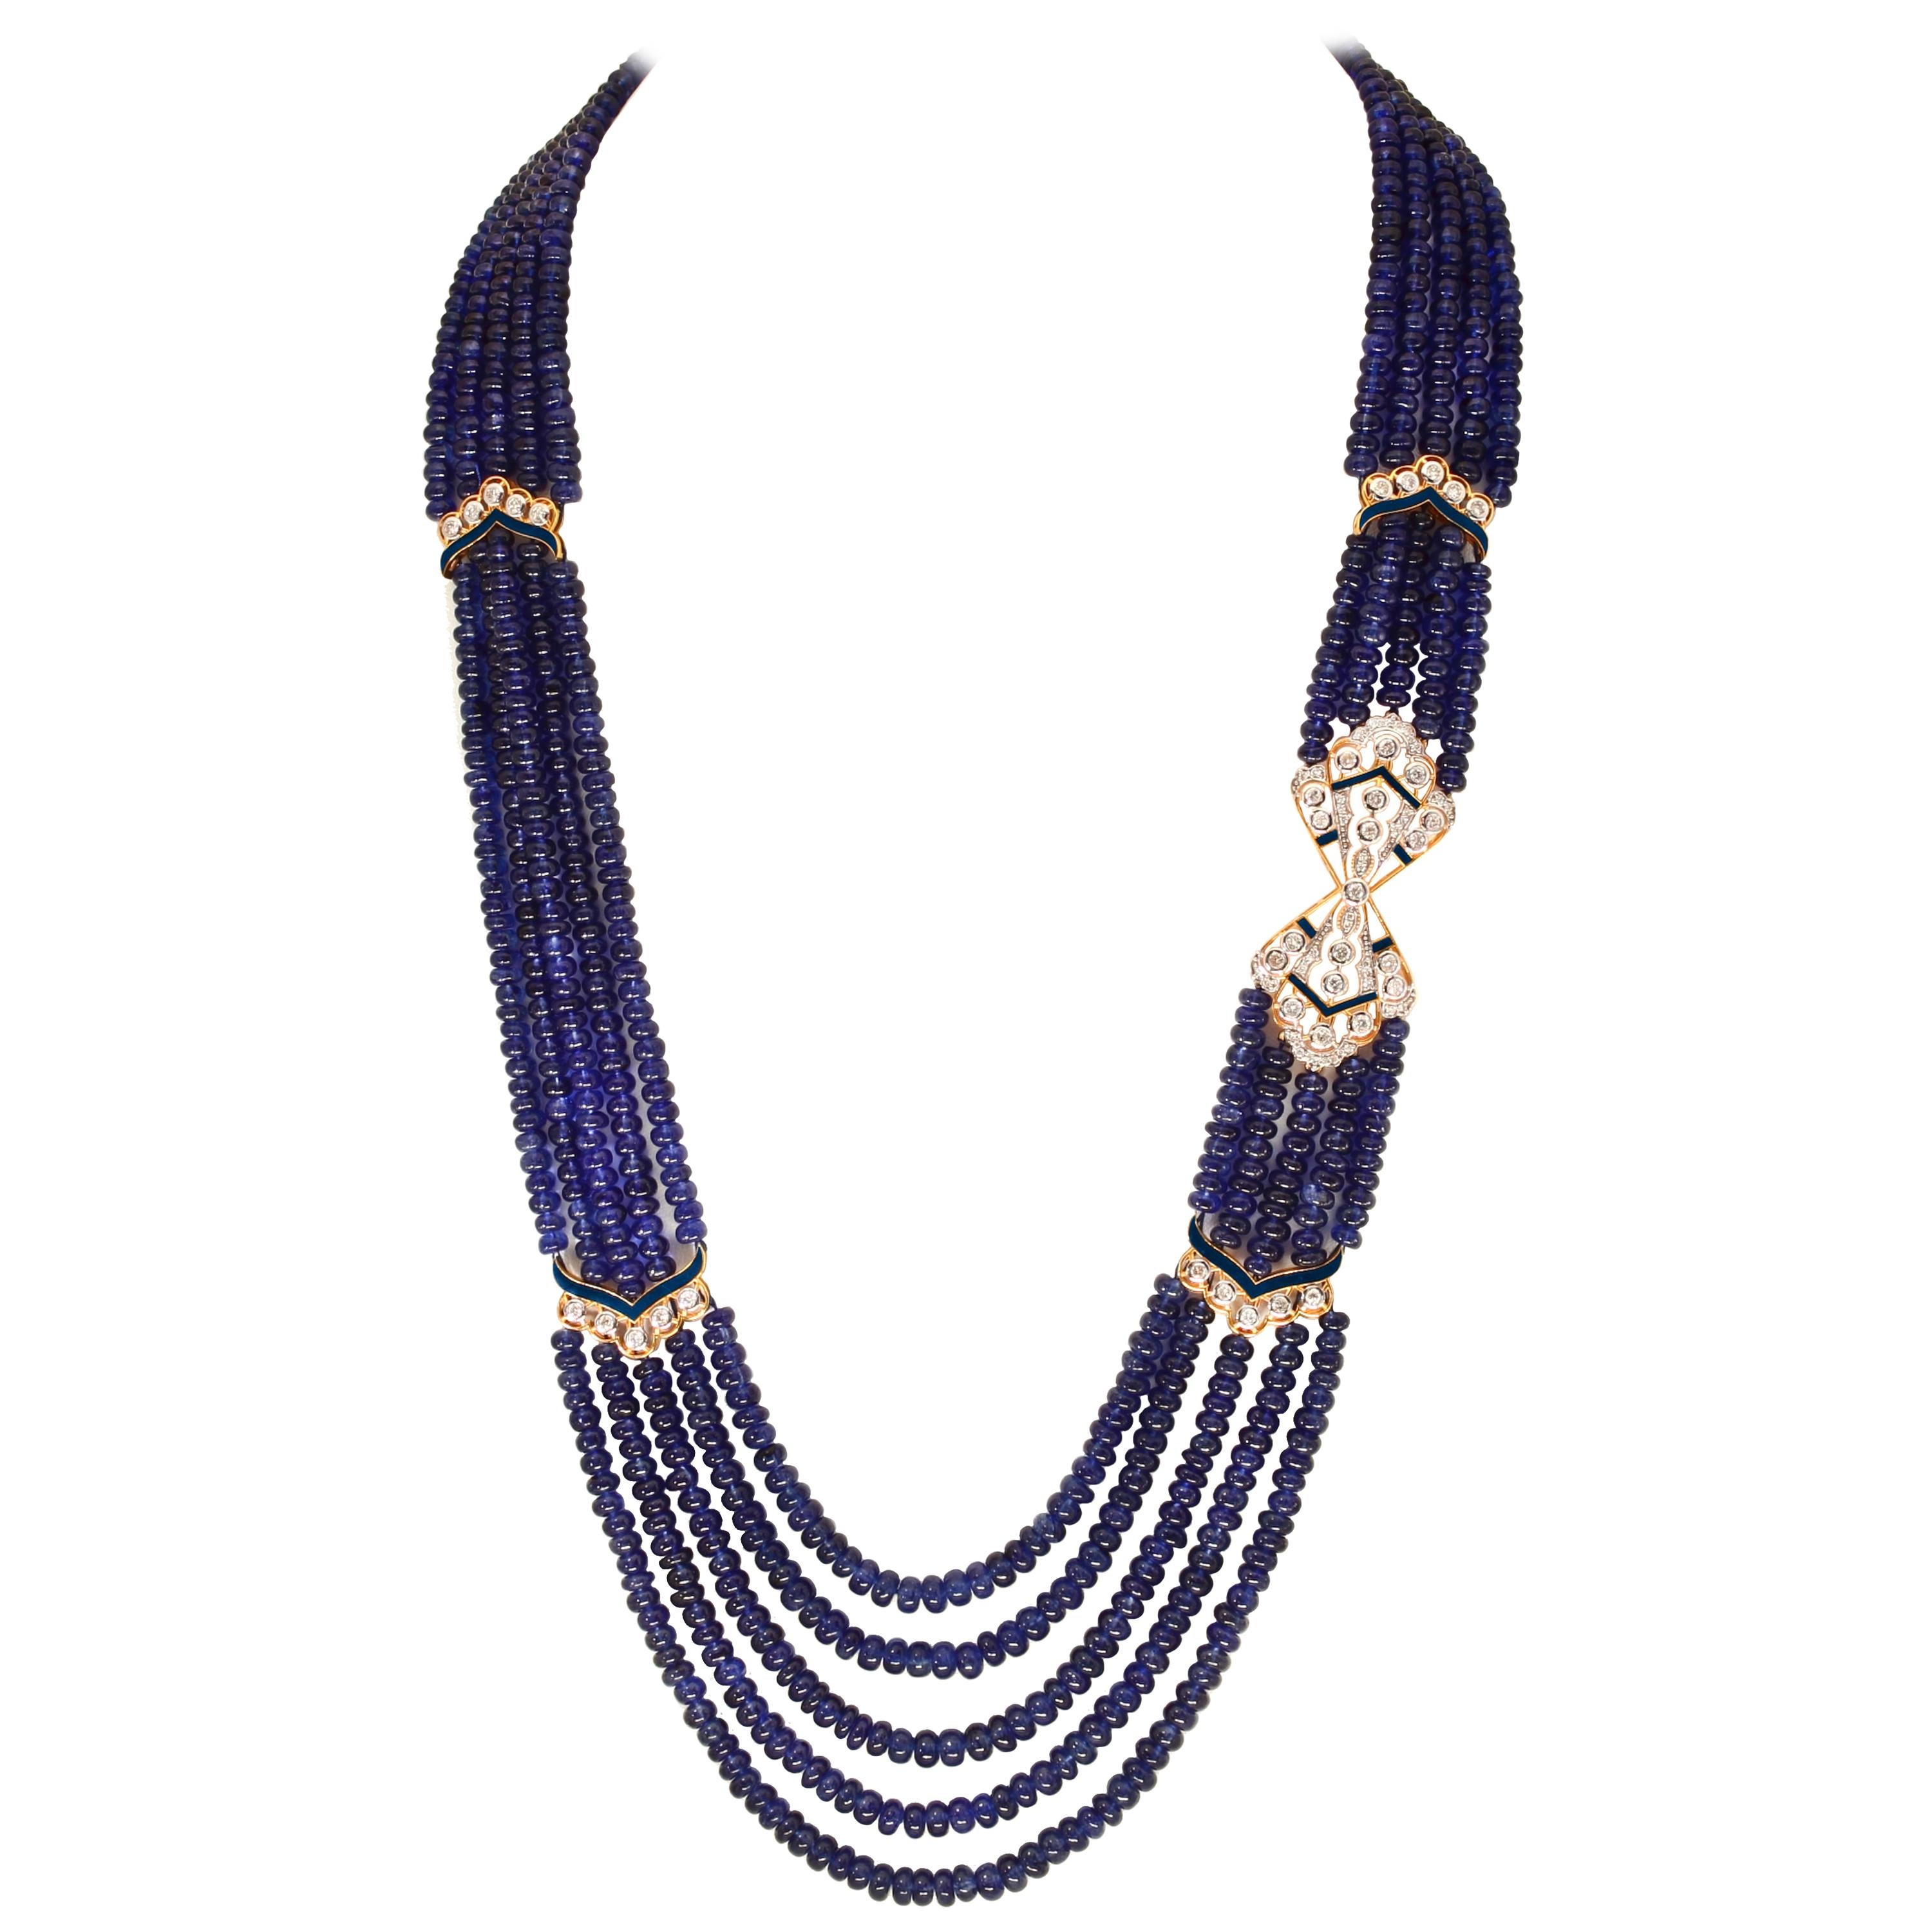 1000 Ct Natural Tanzanite Bead Five Strand Necklace + 4.5 Ct Diamond 14 K Y Gold For Sale